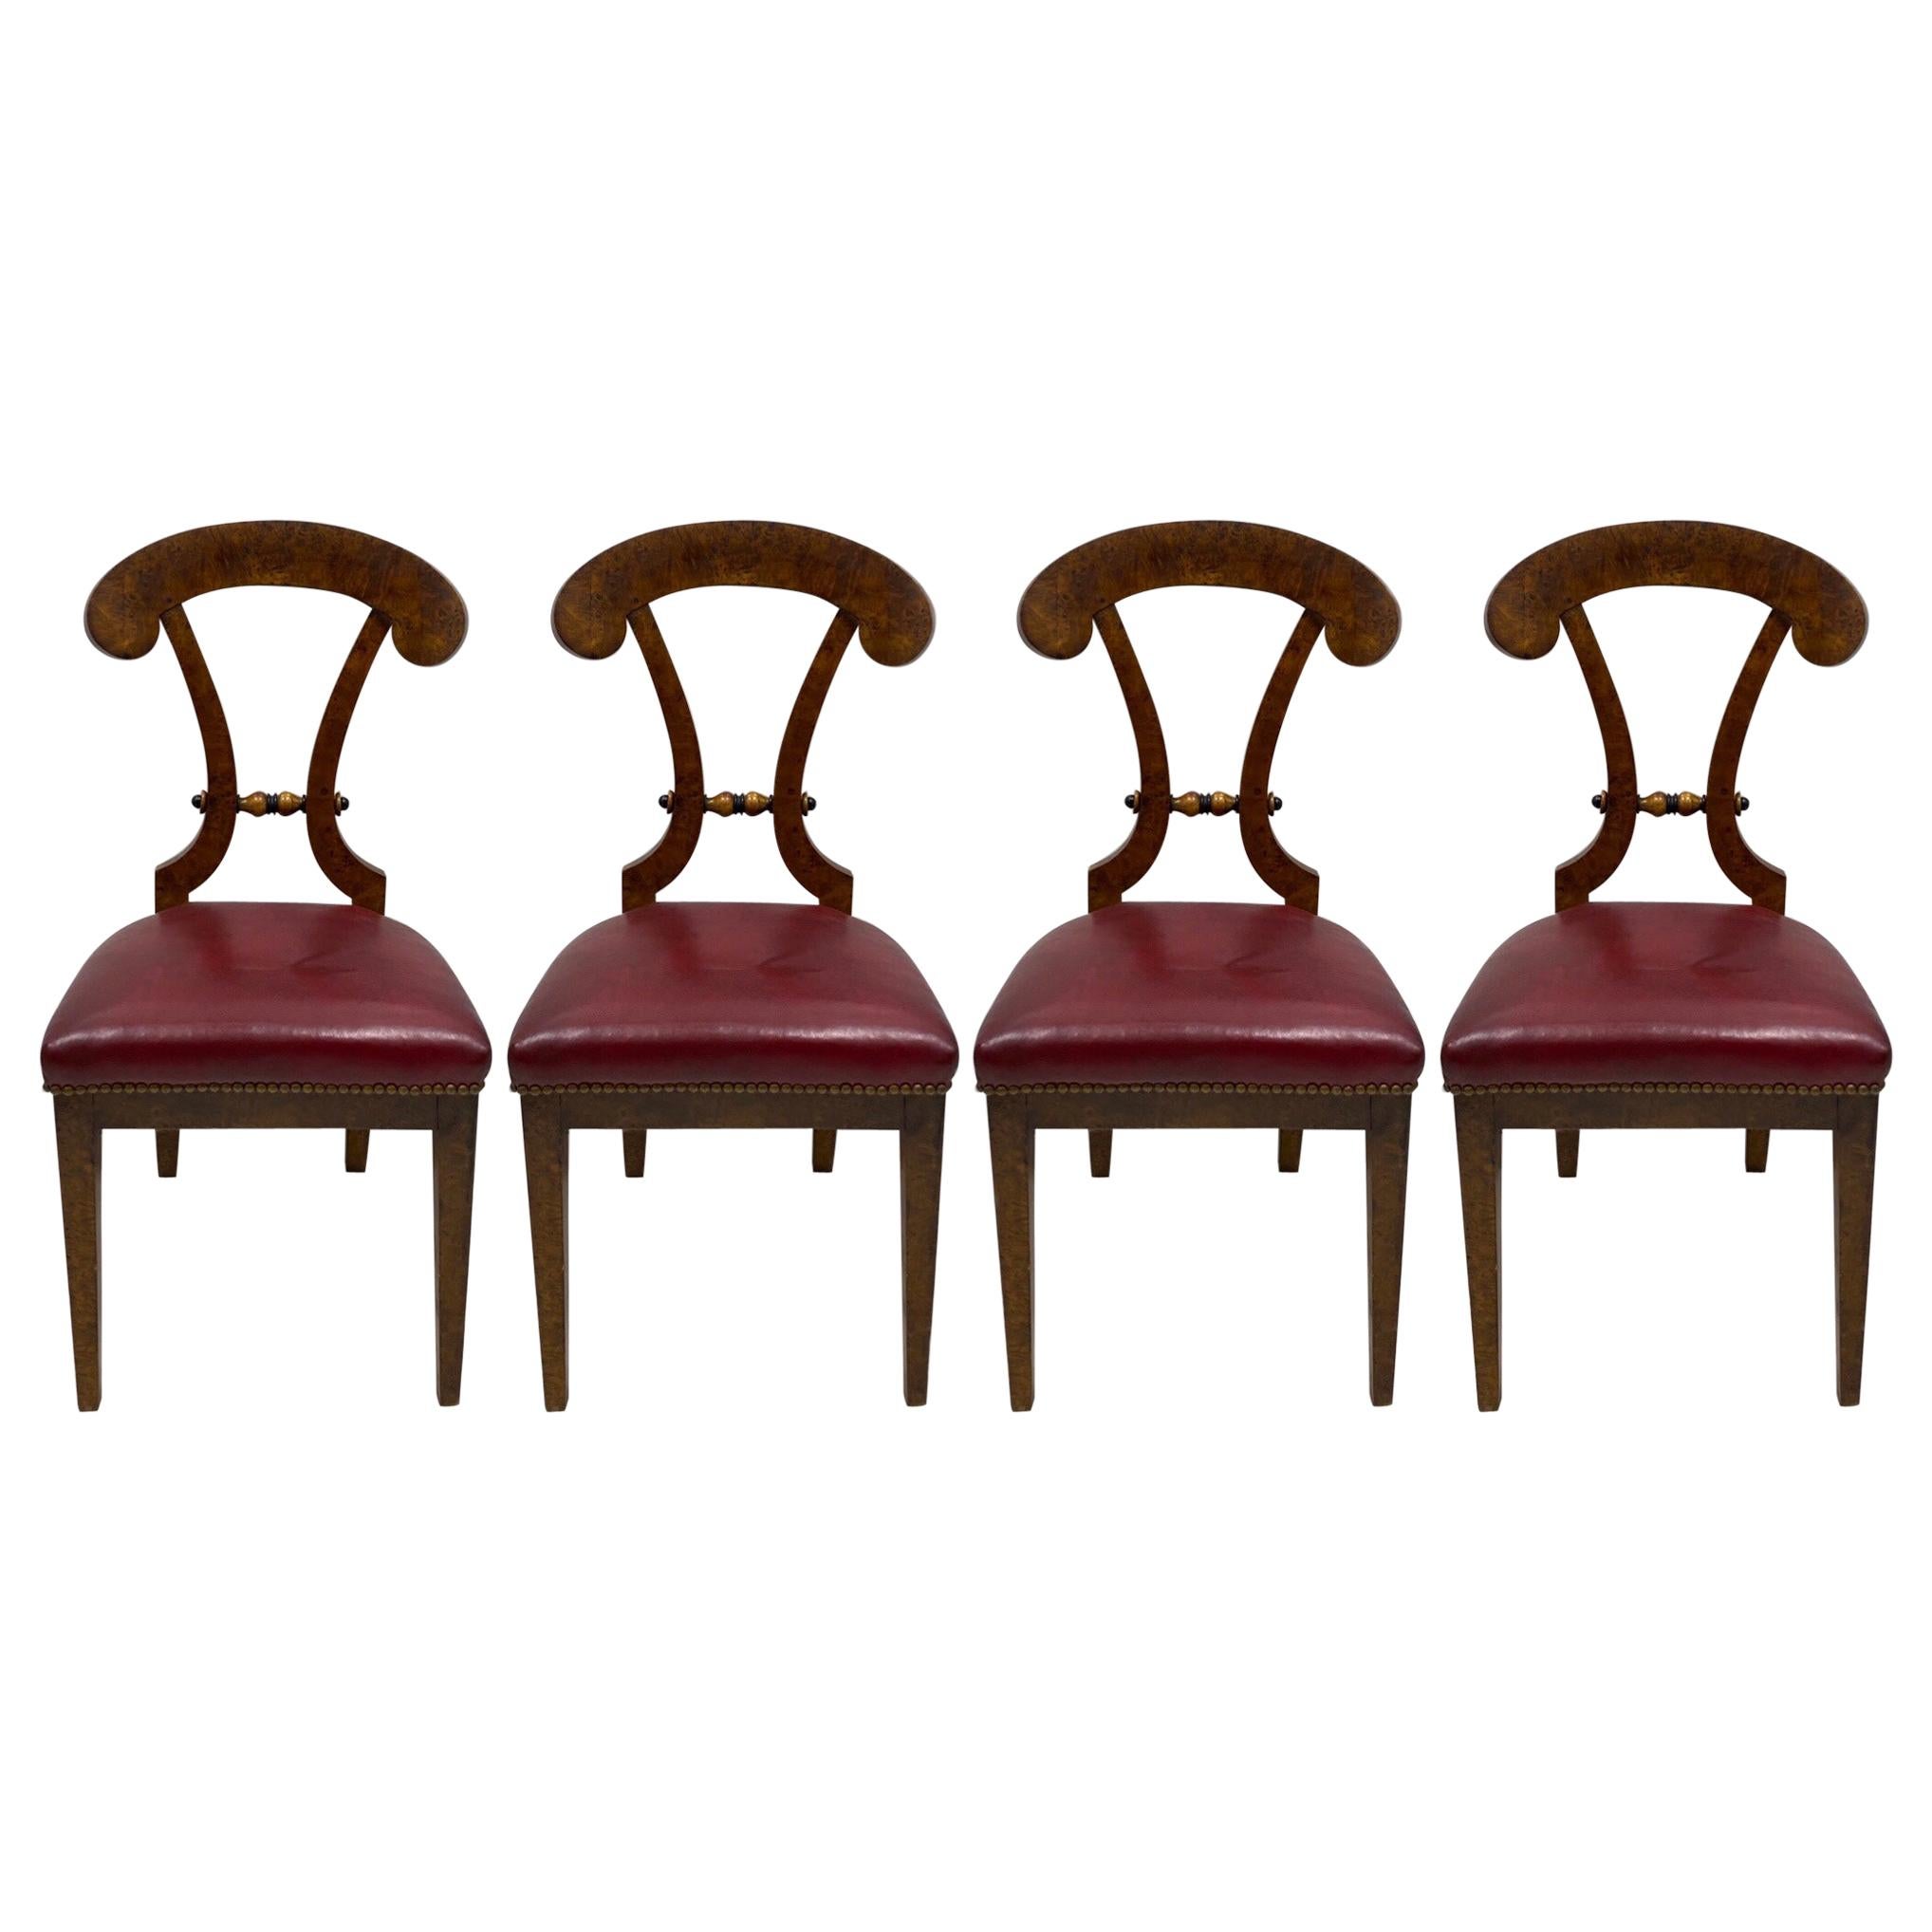 Art Deco Biedermeier Burlwood and Leather Chairs, Set of 4 For Sale